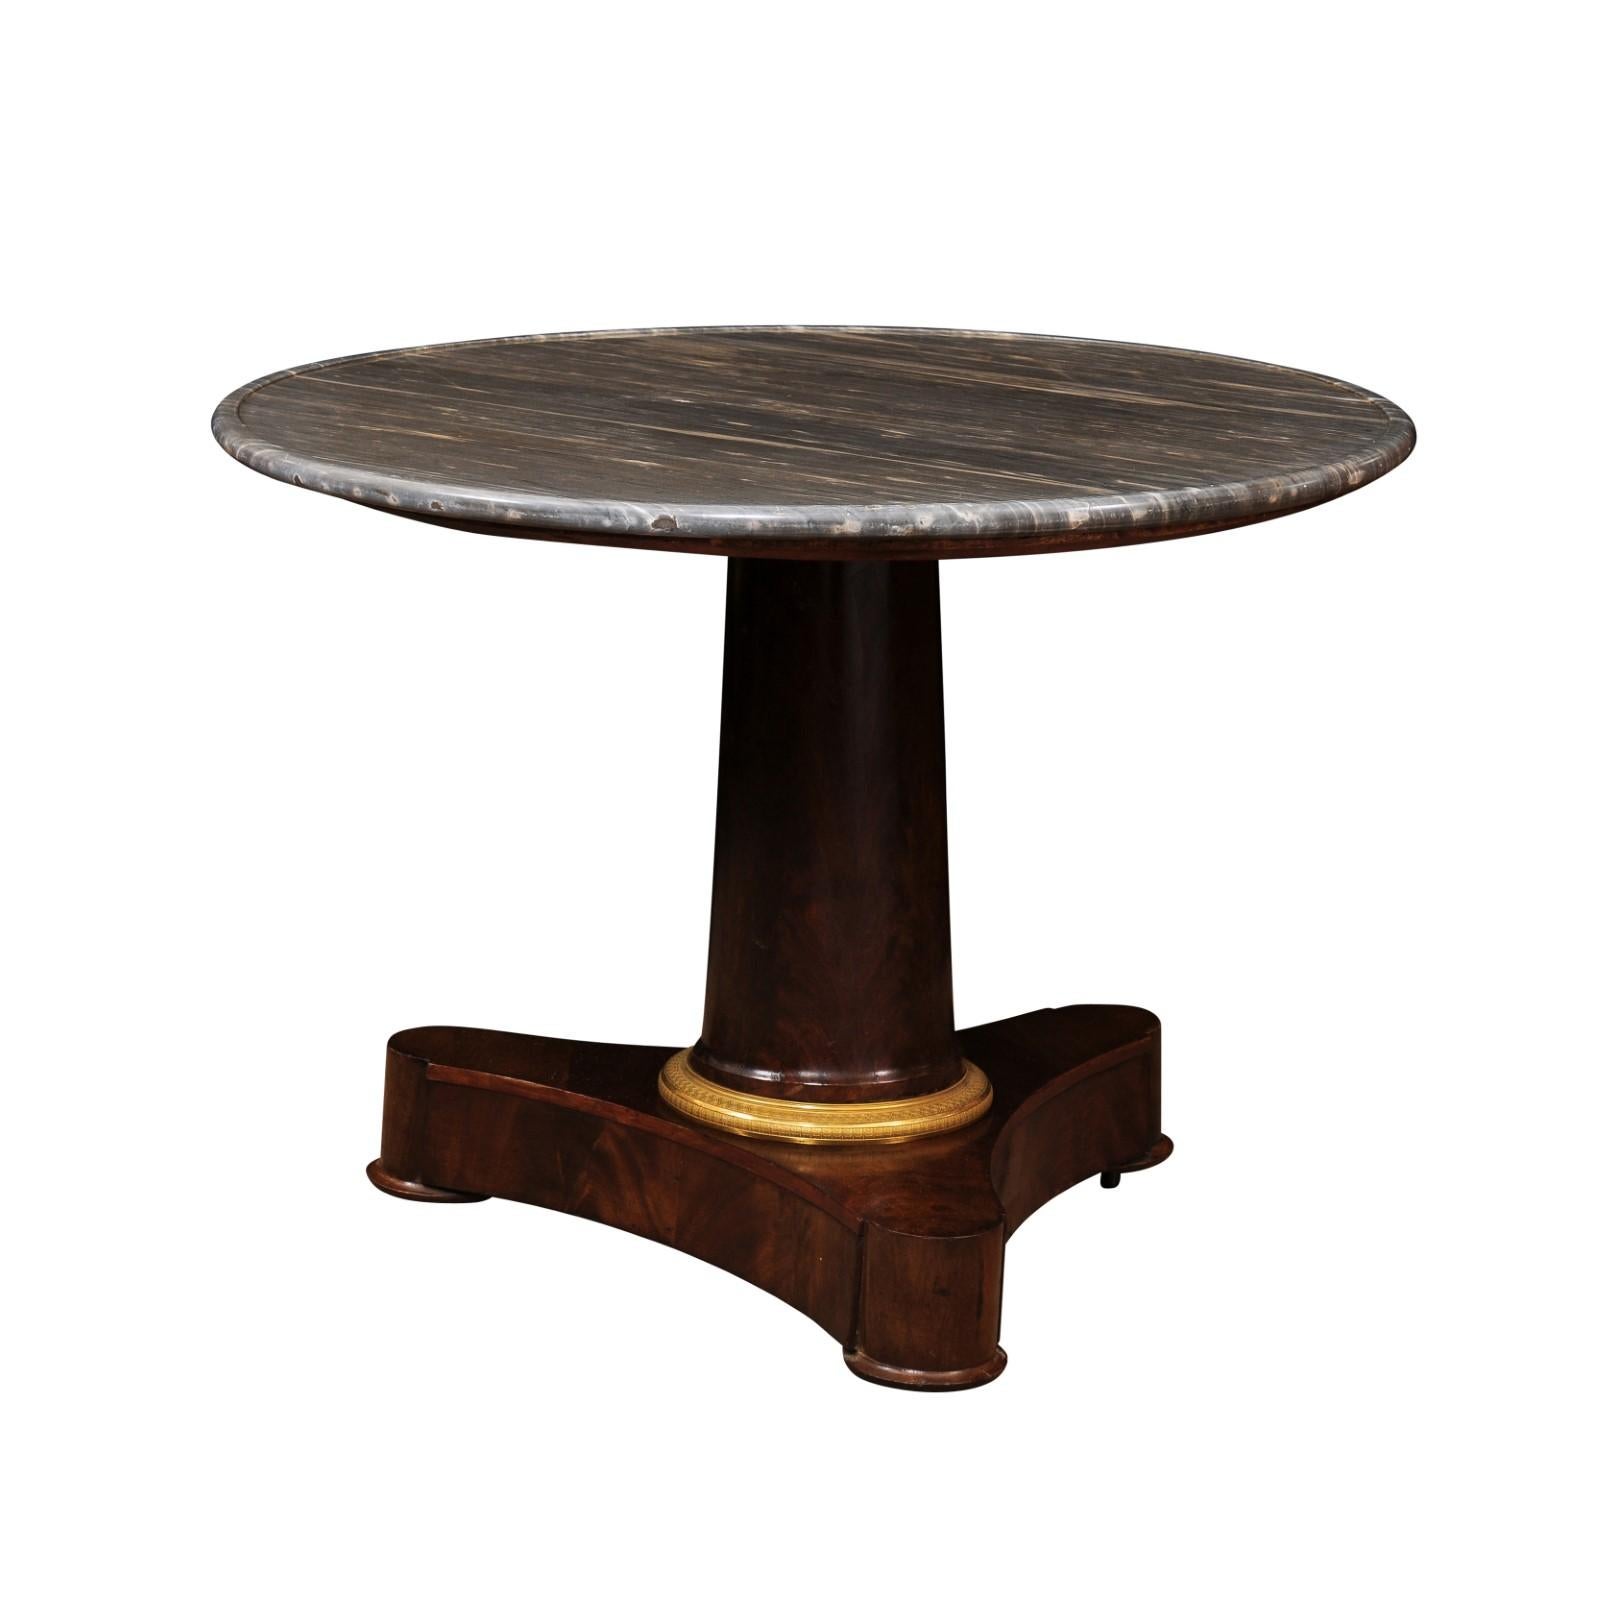 Early 19th Century French Empire Walnut Gueridon / Center Table with Grey Marble Top & Ormolu Detail